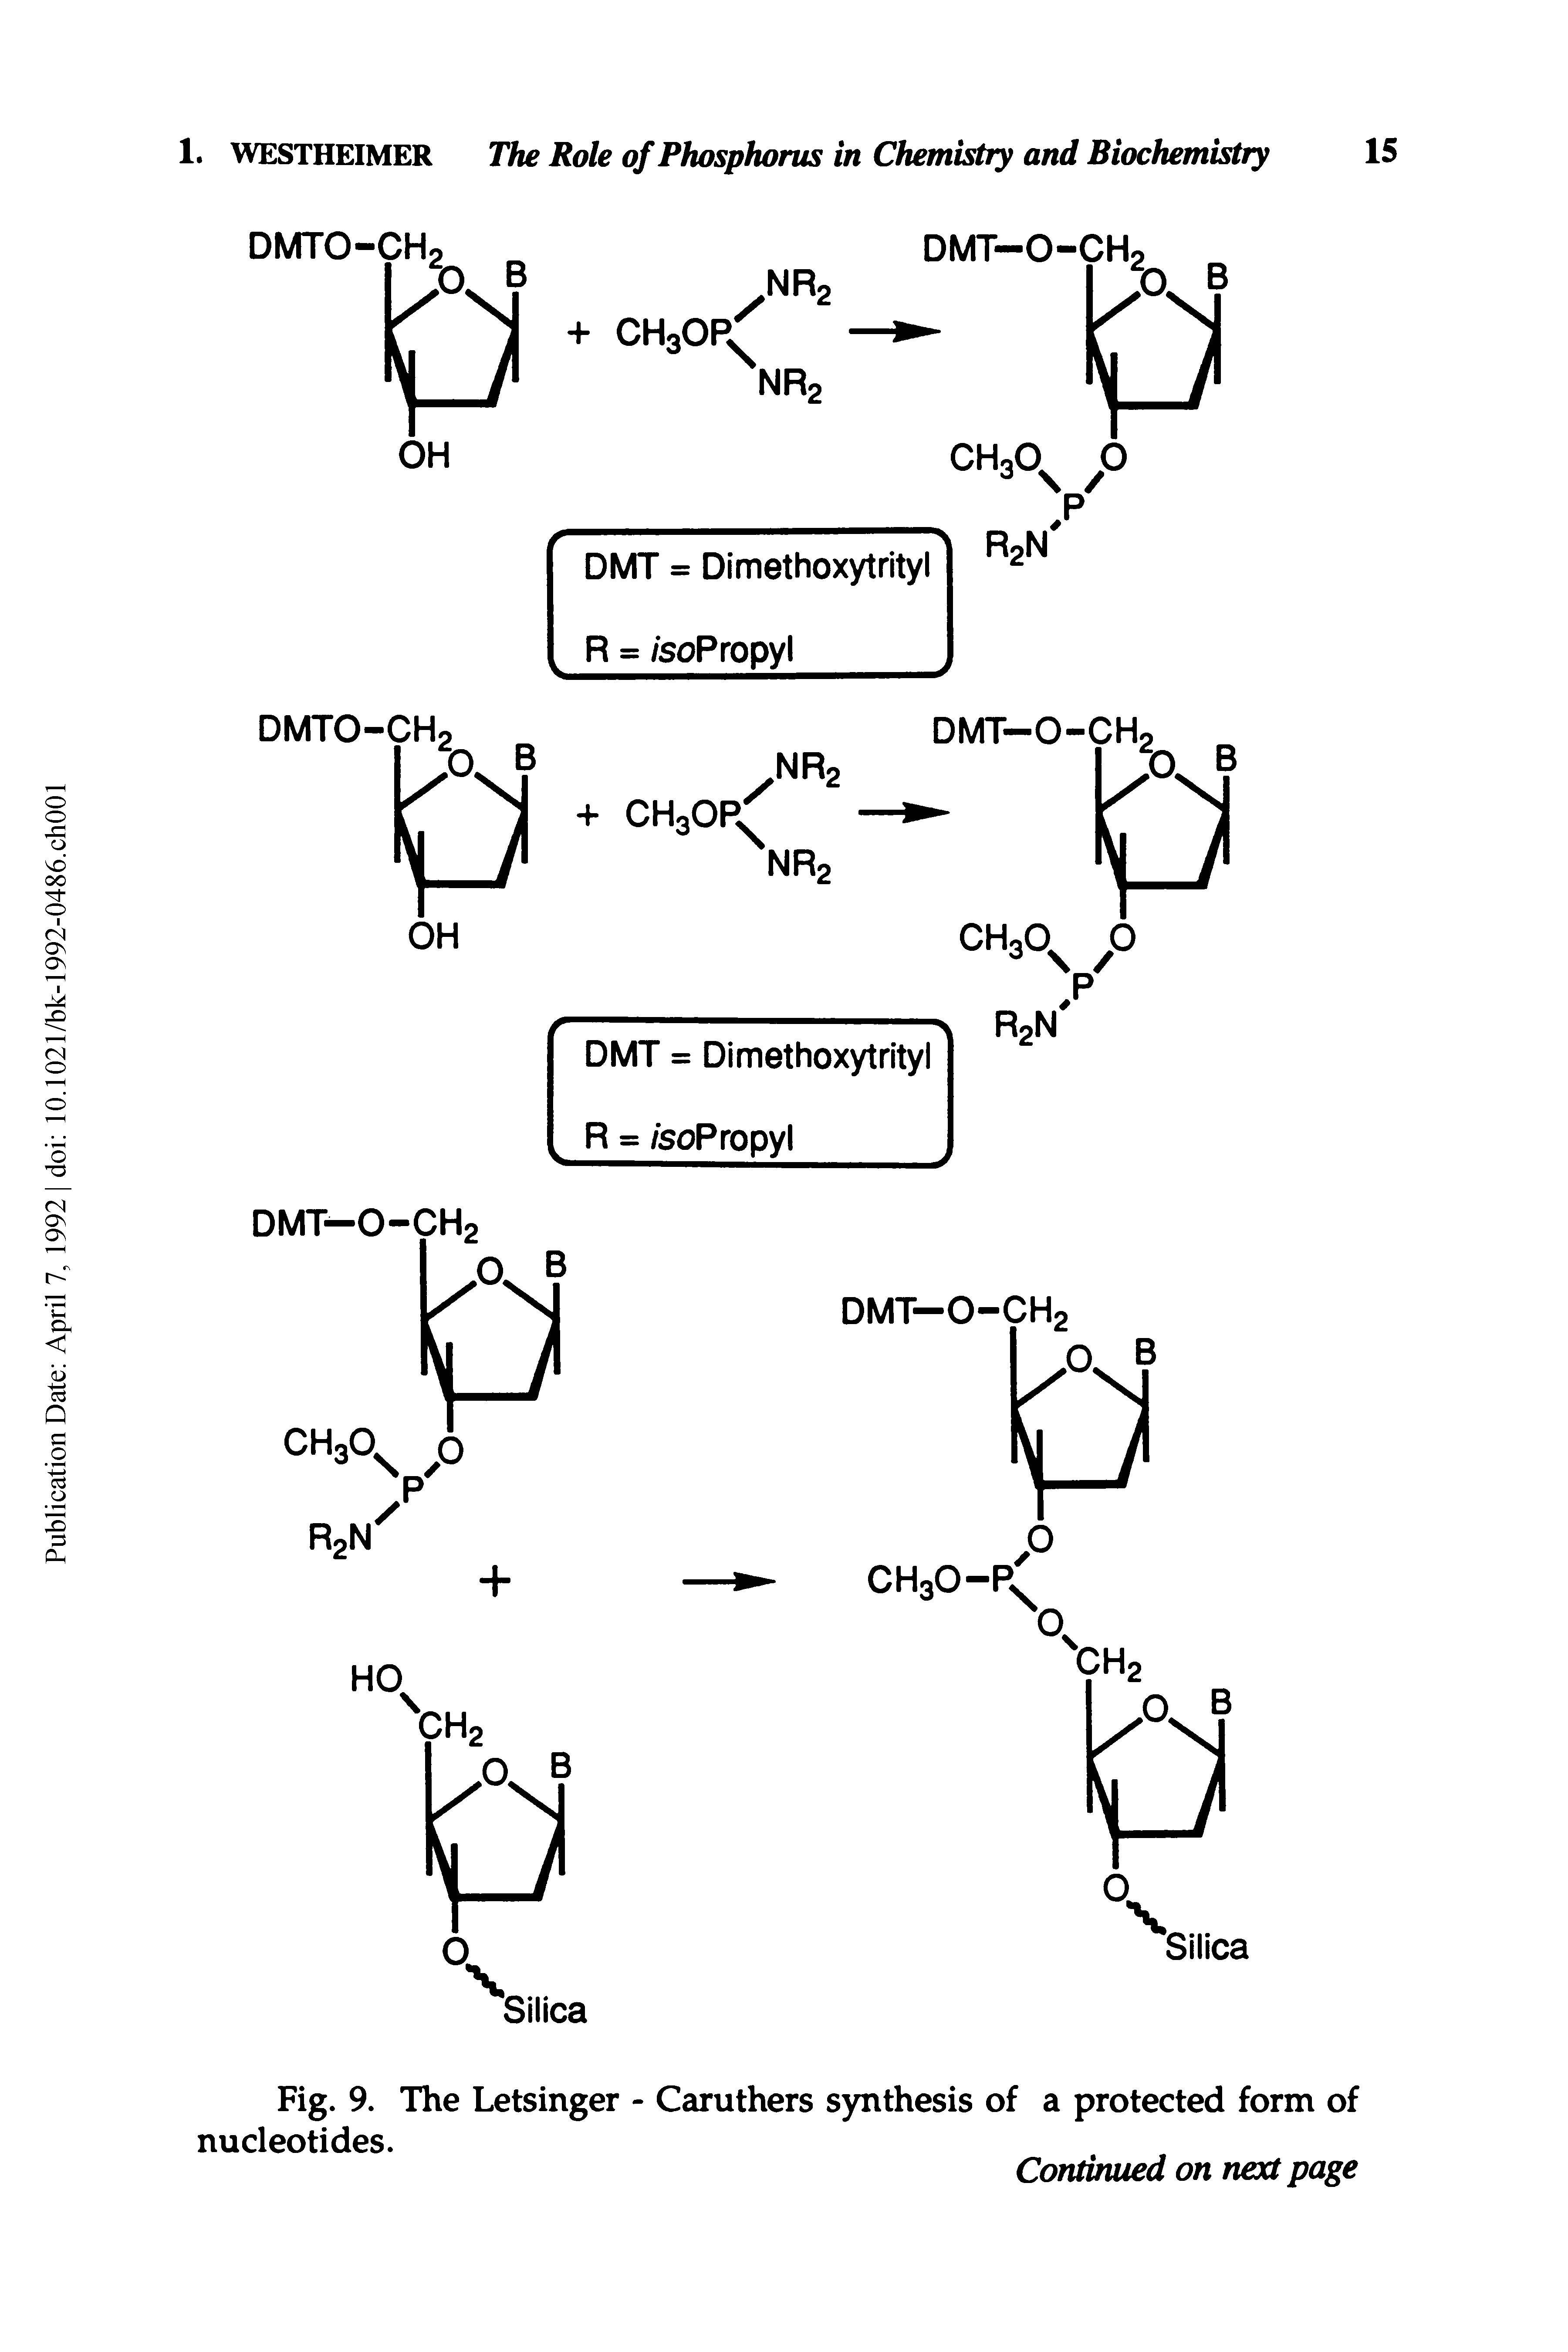 Fig. 9. The Letsinger - Caruthers synthesis of a protected form of nucleotides.